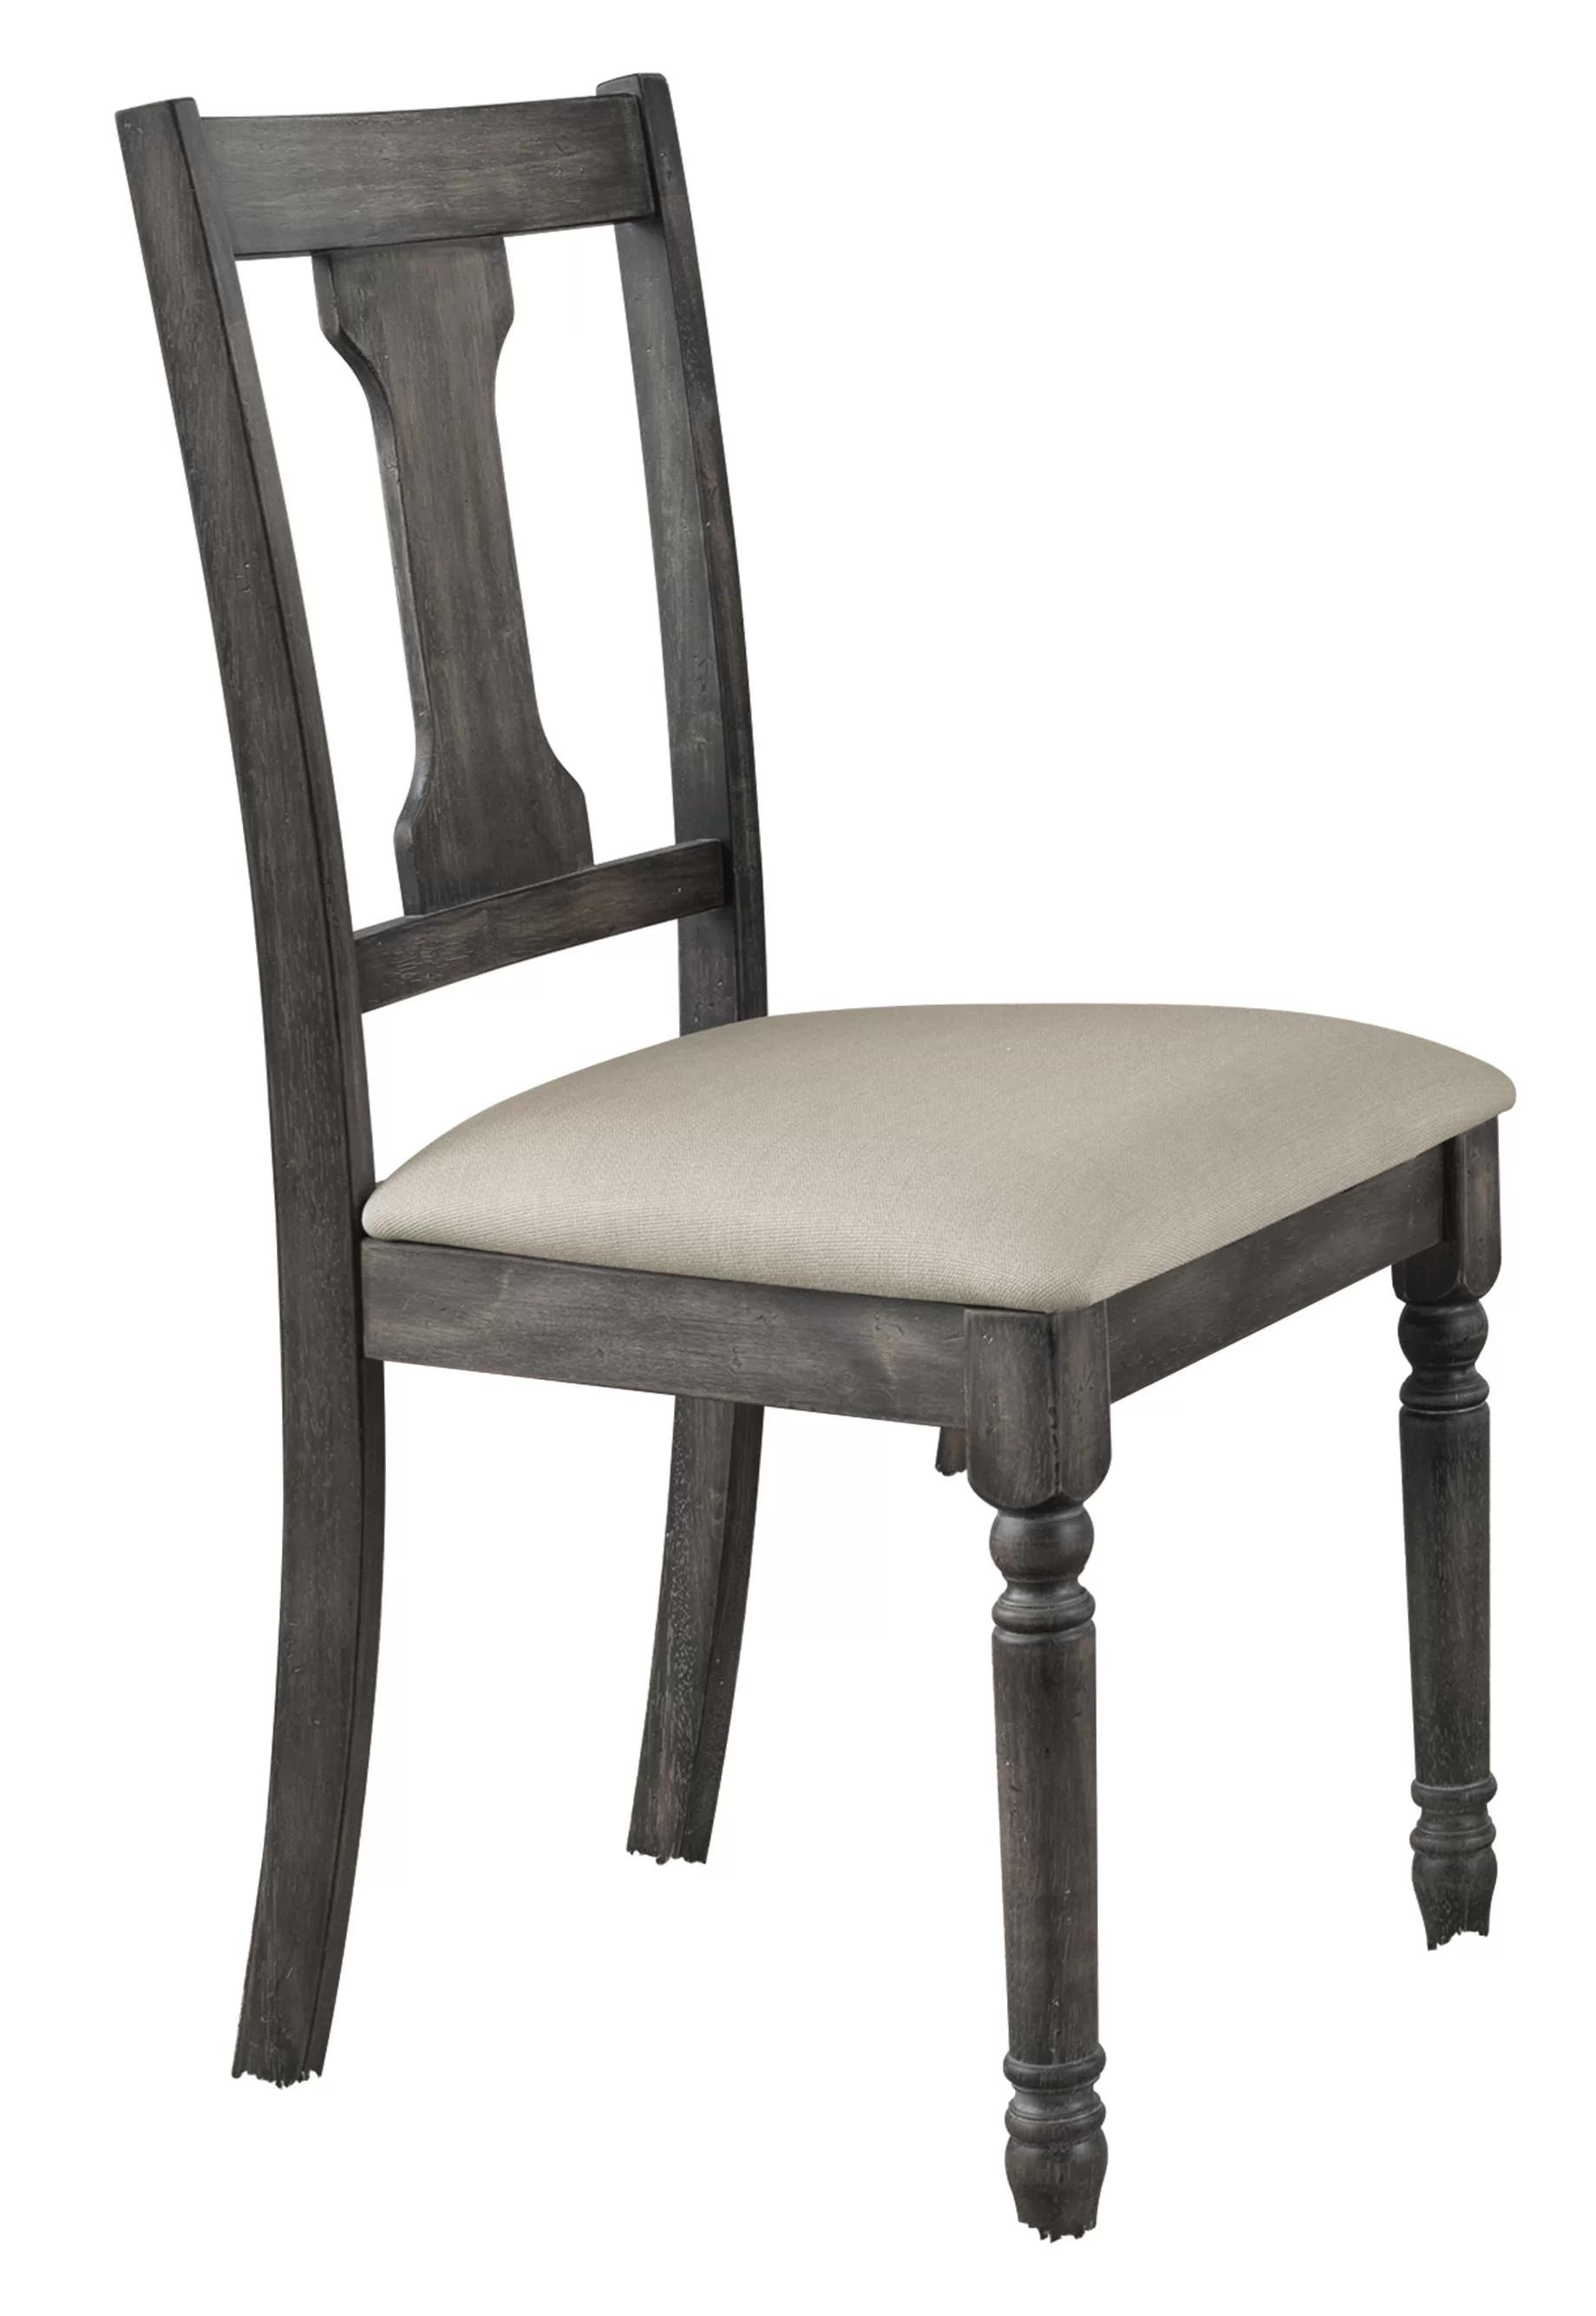 Contemporary, Rustic Side Chair Set Wallace 71437-2pcs in Gray Linen